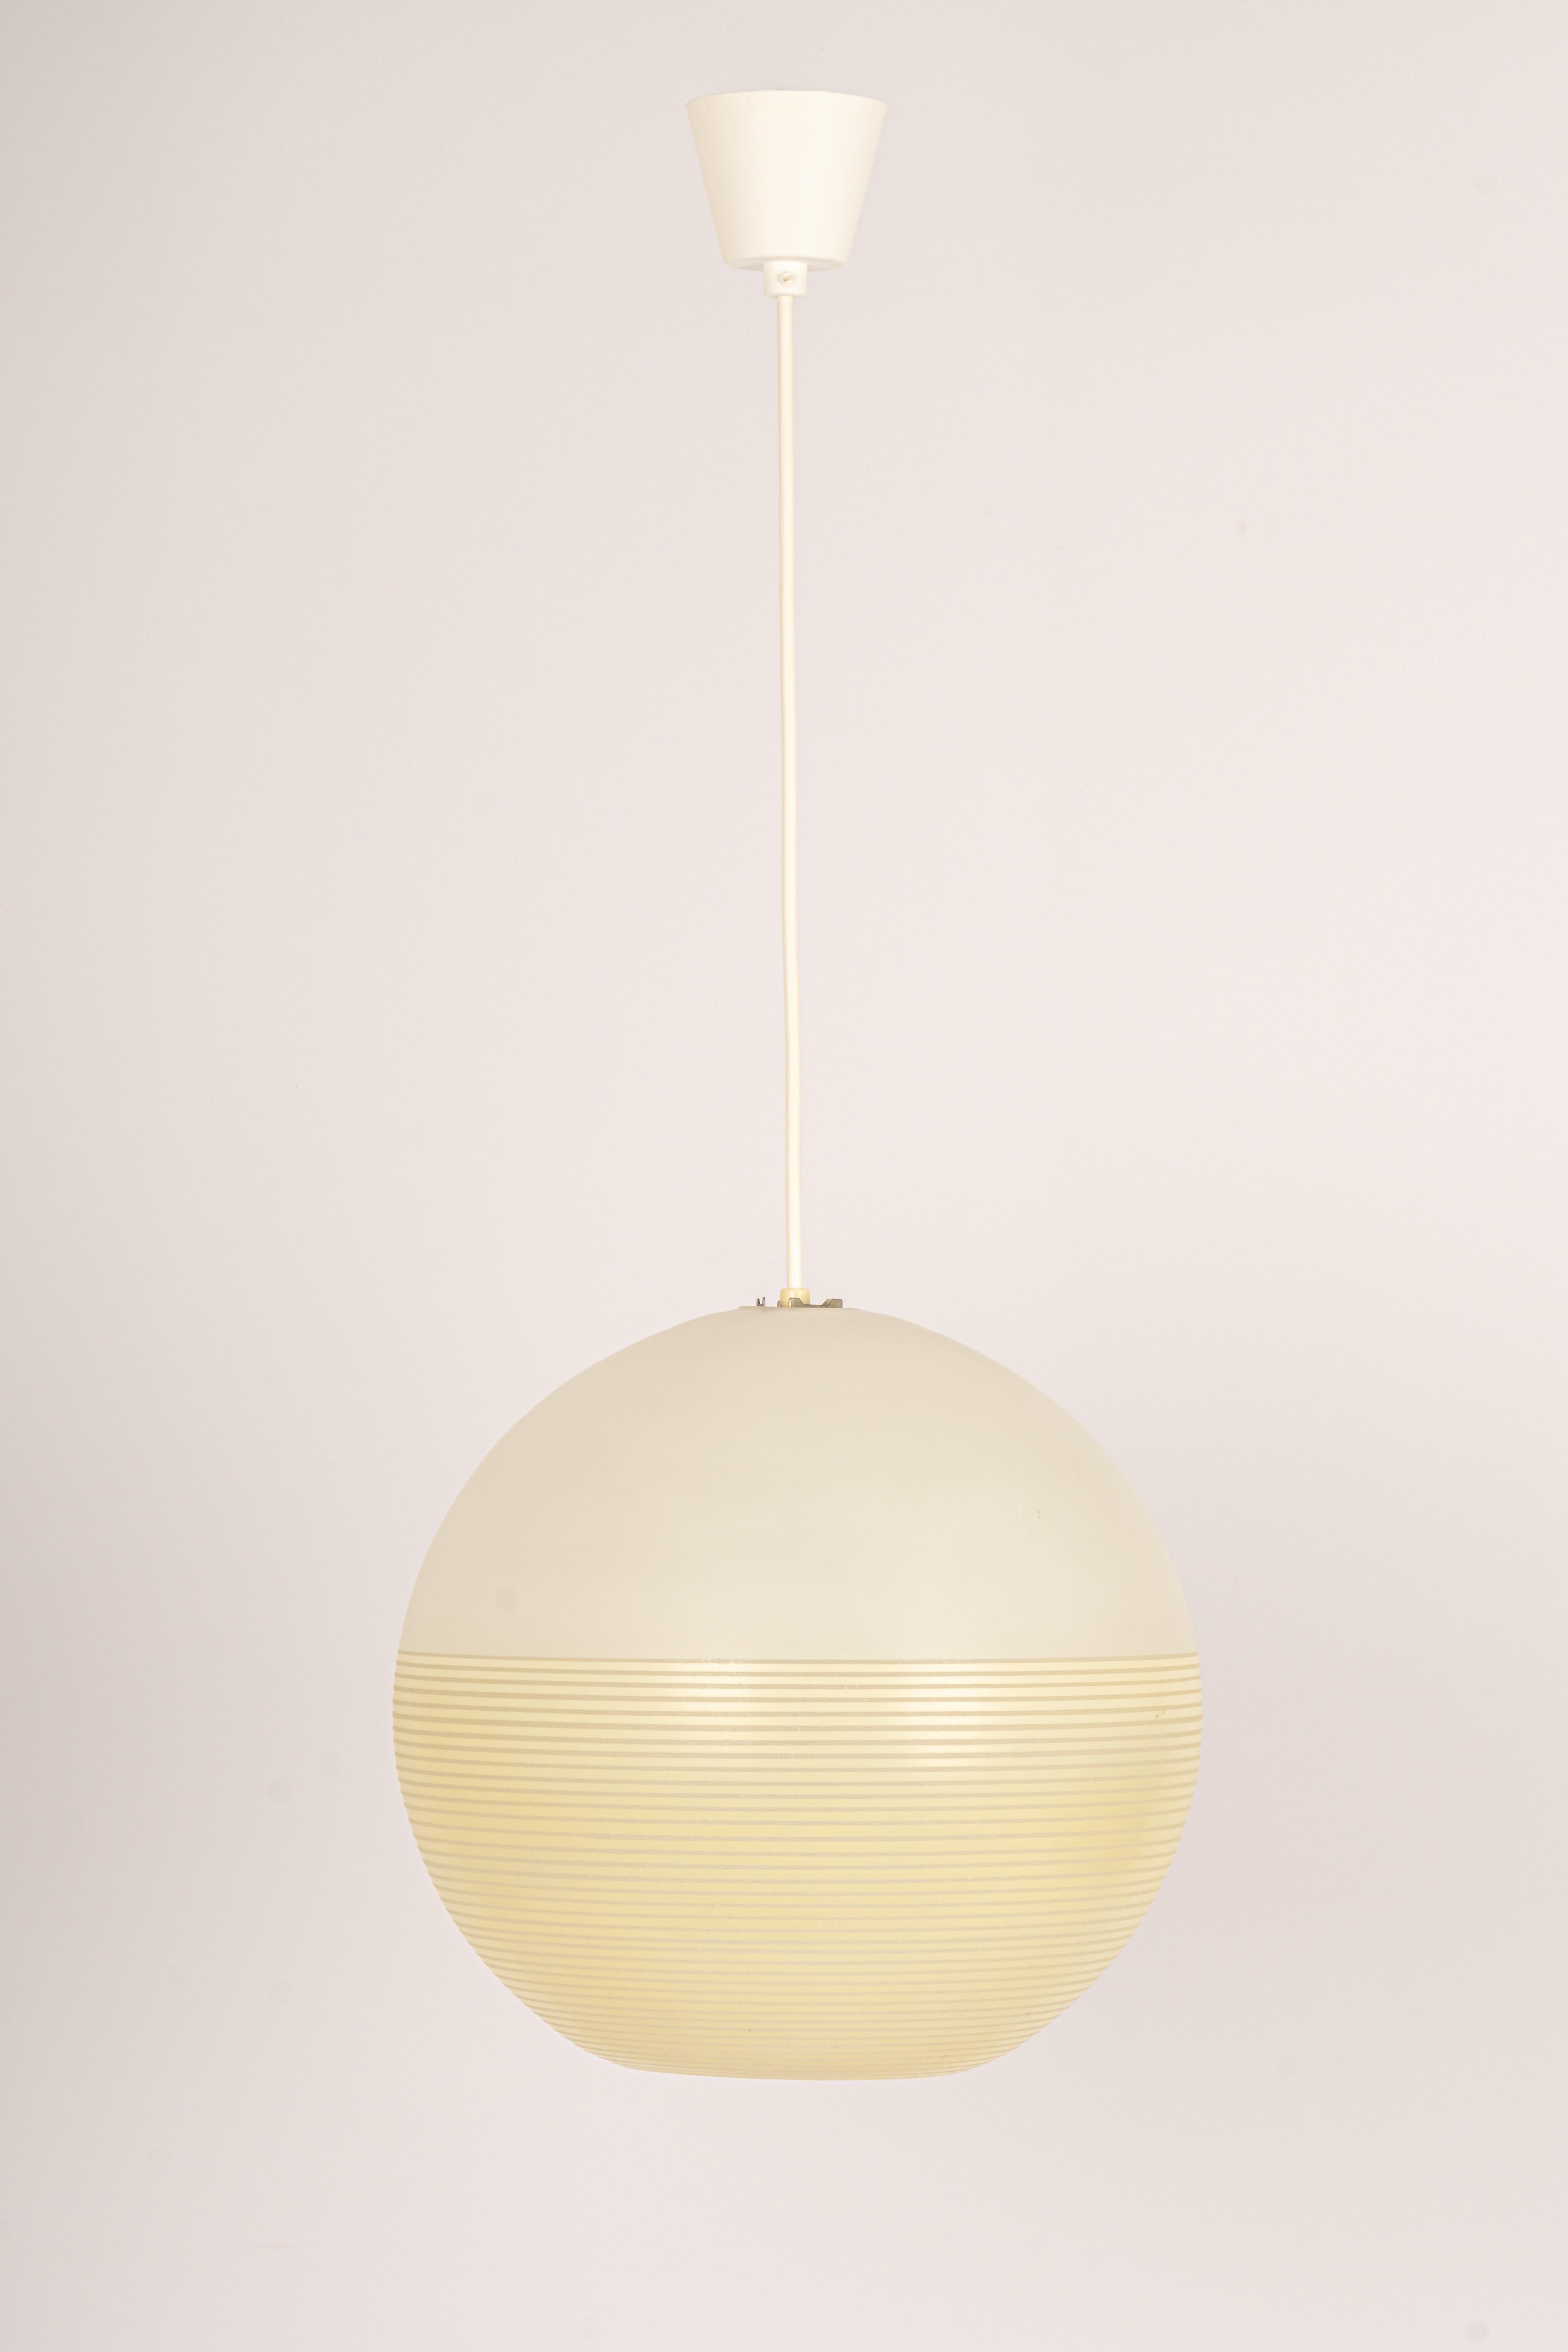 Glass Ball Pendant Light by Doria, Germany, 1960s For Sale 5